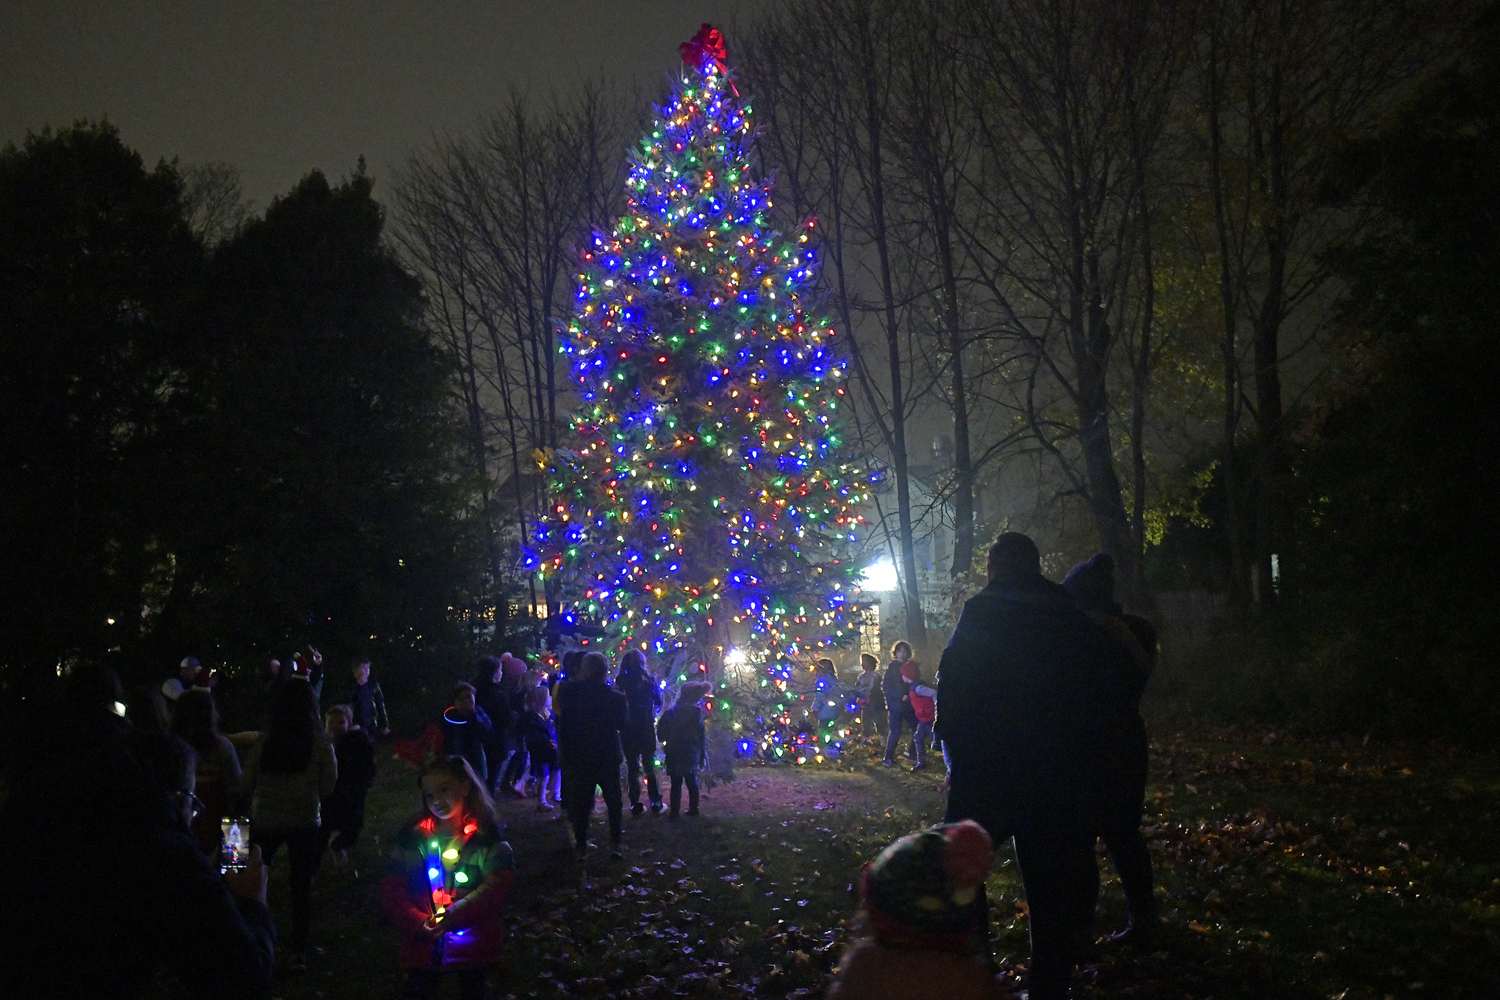 The tree is lighted on the village green in Westhampton Beach on Saturday evening.